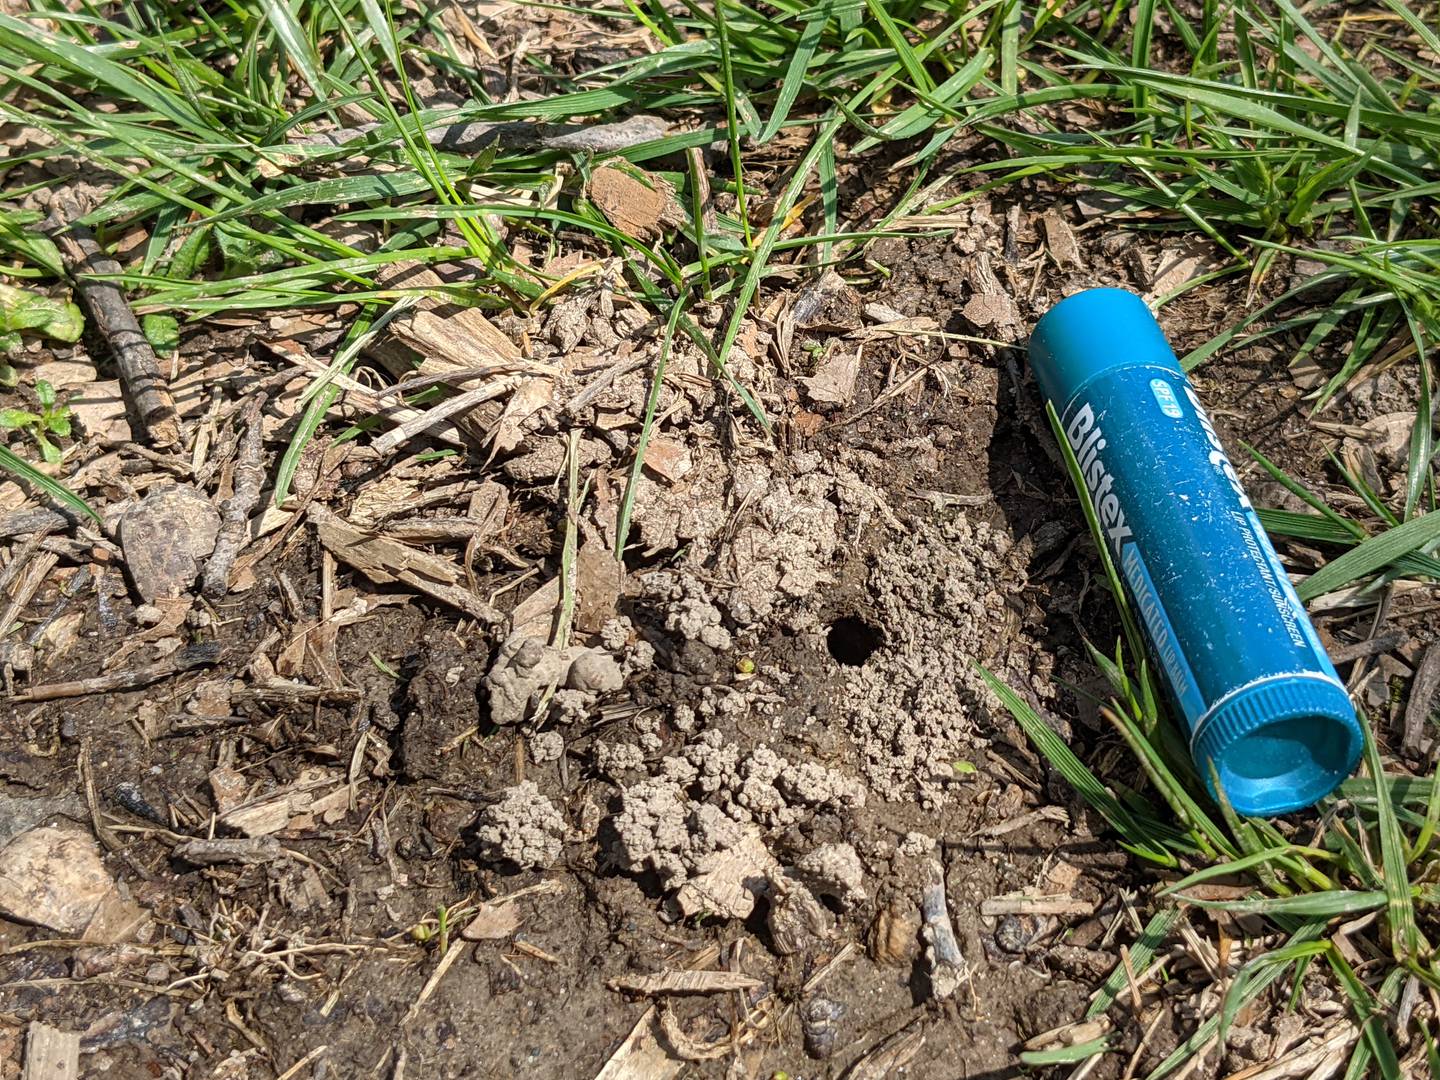 Cellophane bee tunnels resemble ant hills, but the hole is larger, about the diameter of a pencil. [[Here a bee is seen exiting her excavation; a 2 5/8th in. lip balm was used for scale.]]